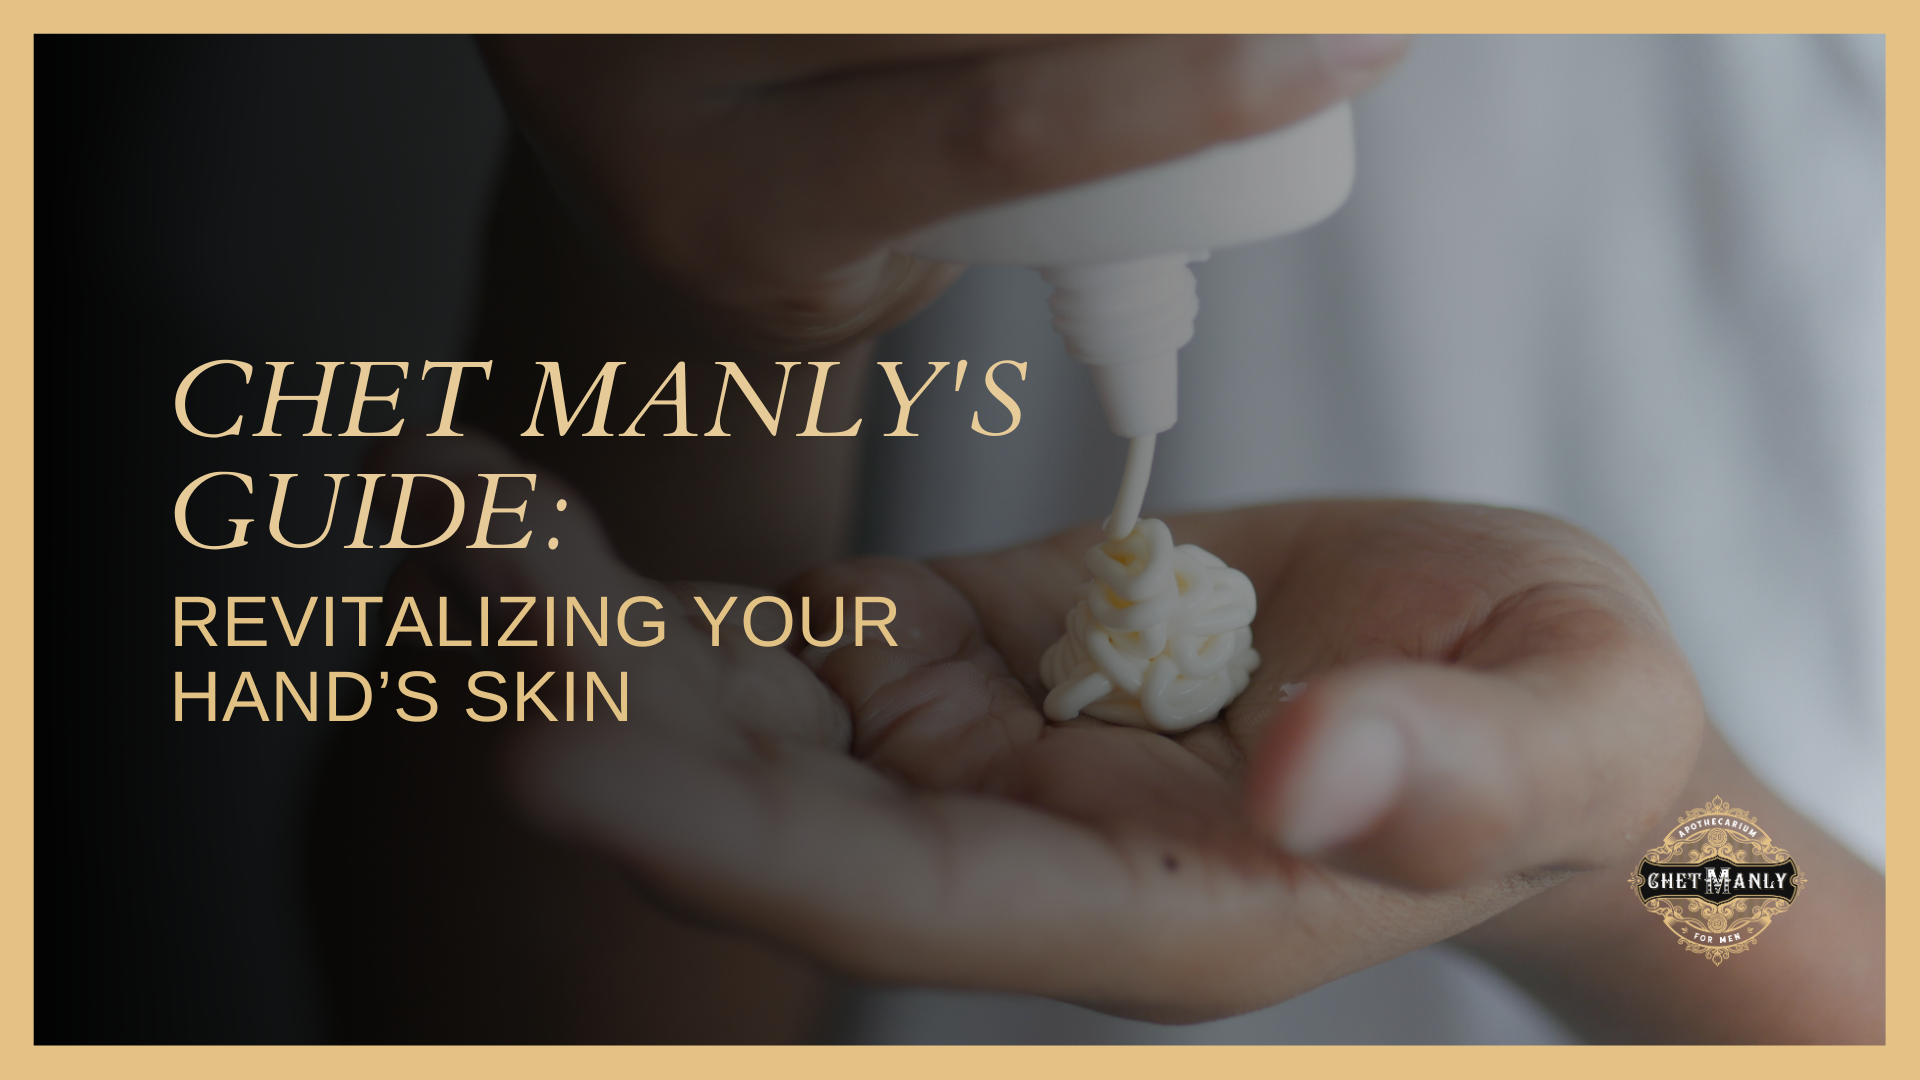 Chet Manly’s Guide : Revitalizing Your Hand's Skin